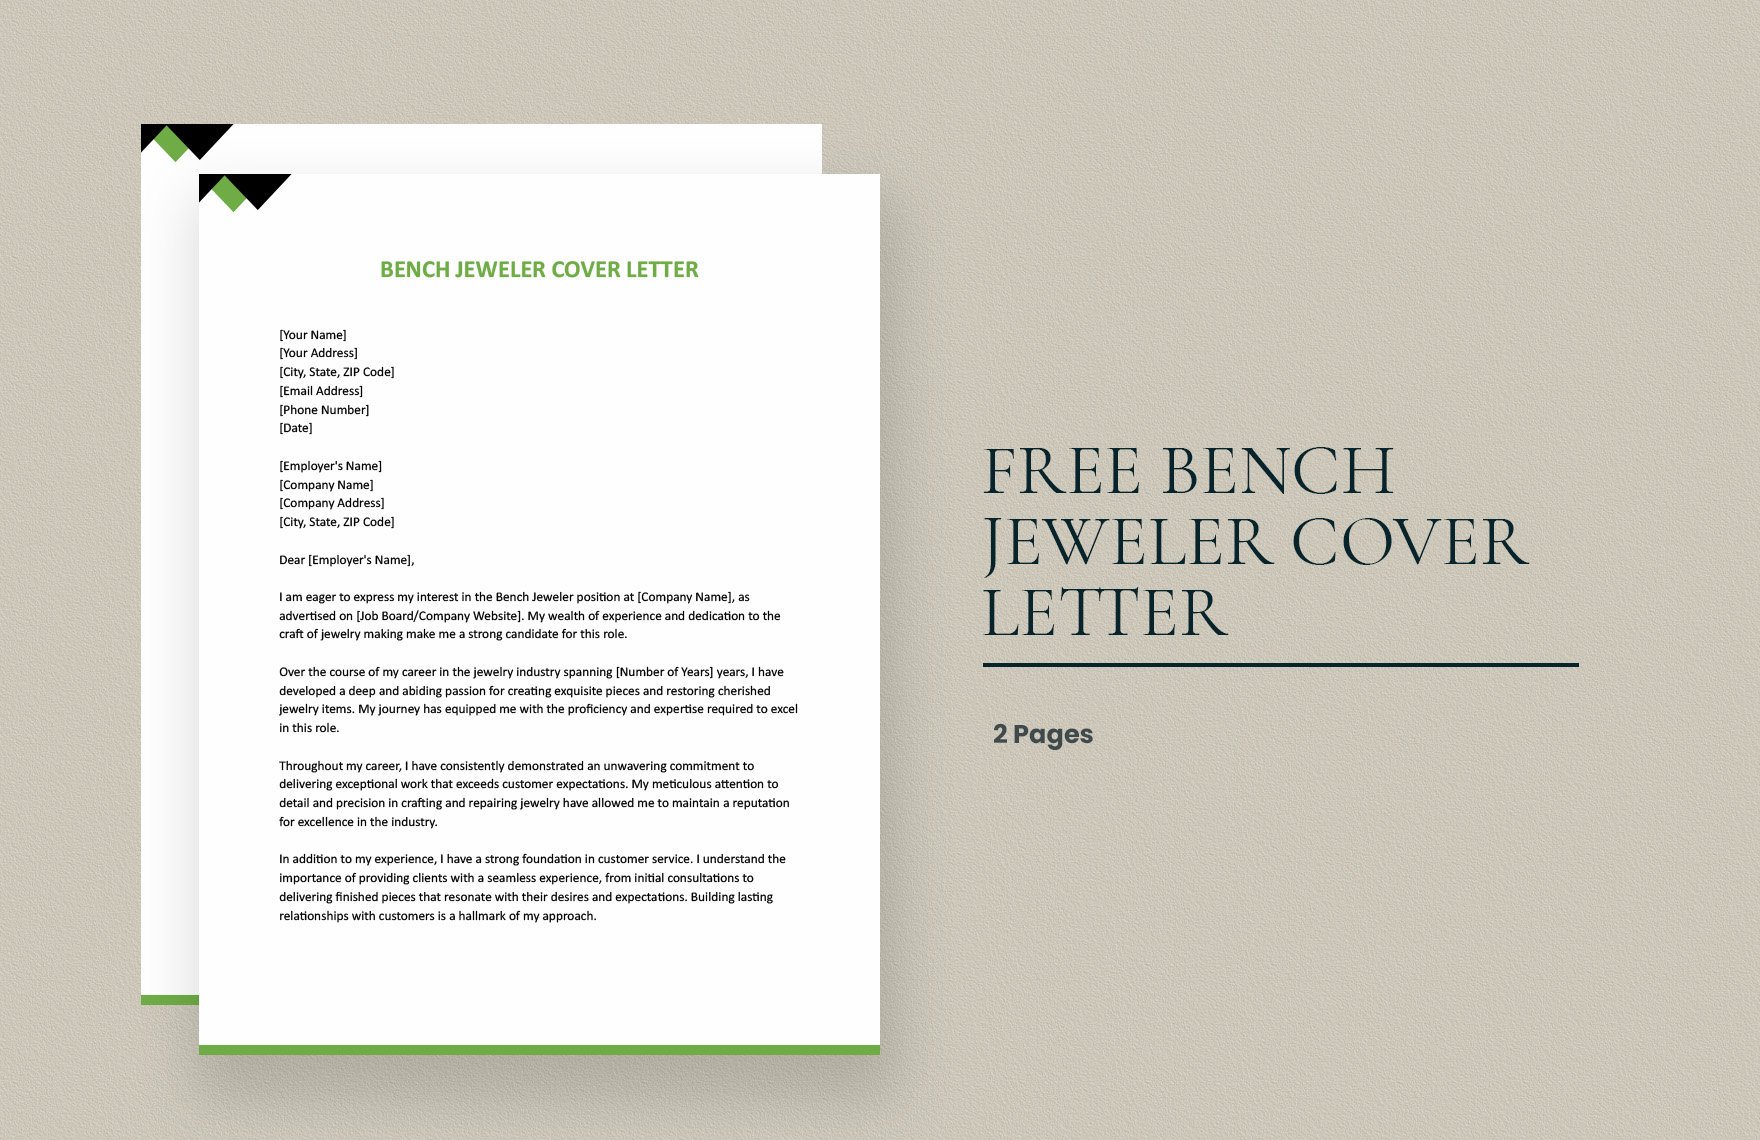 Bench Jeweler Cover Letter in Word, Google Docs